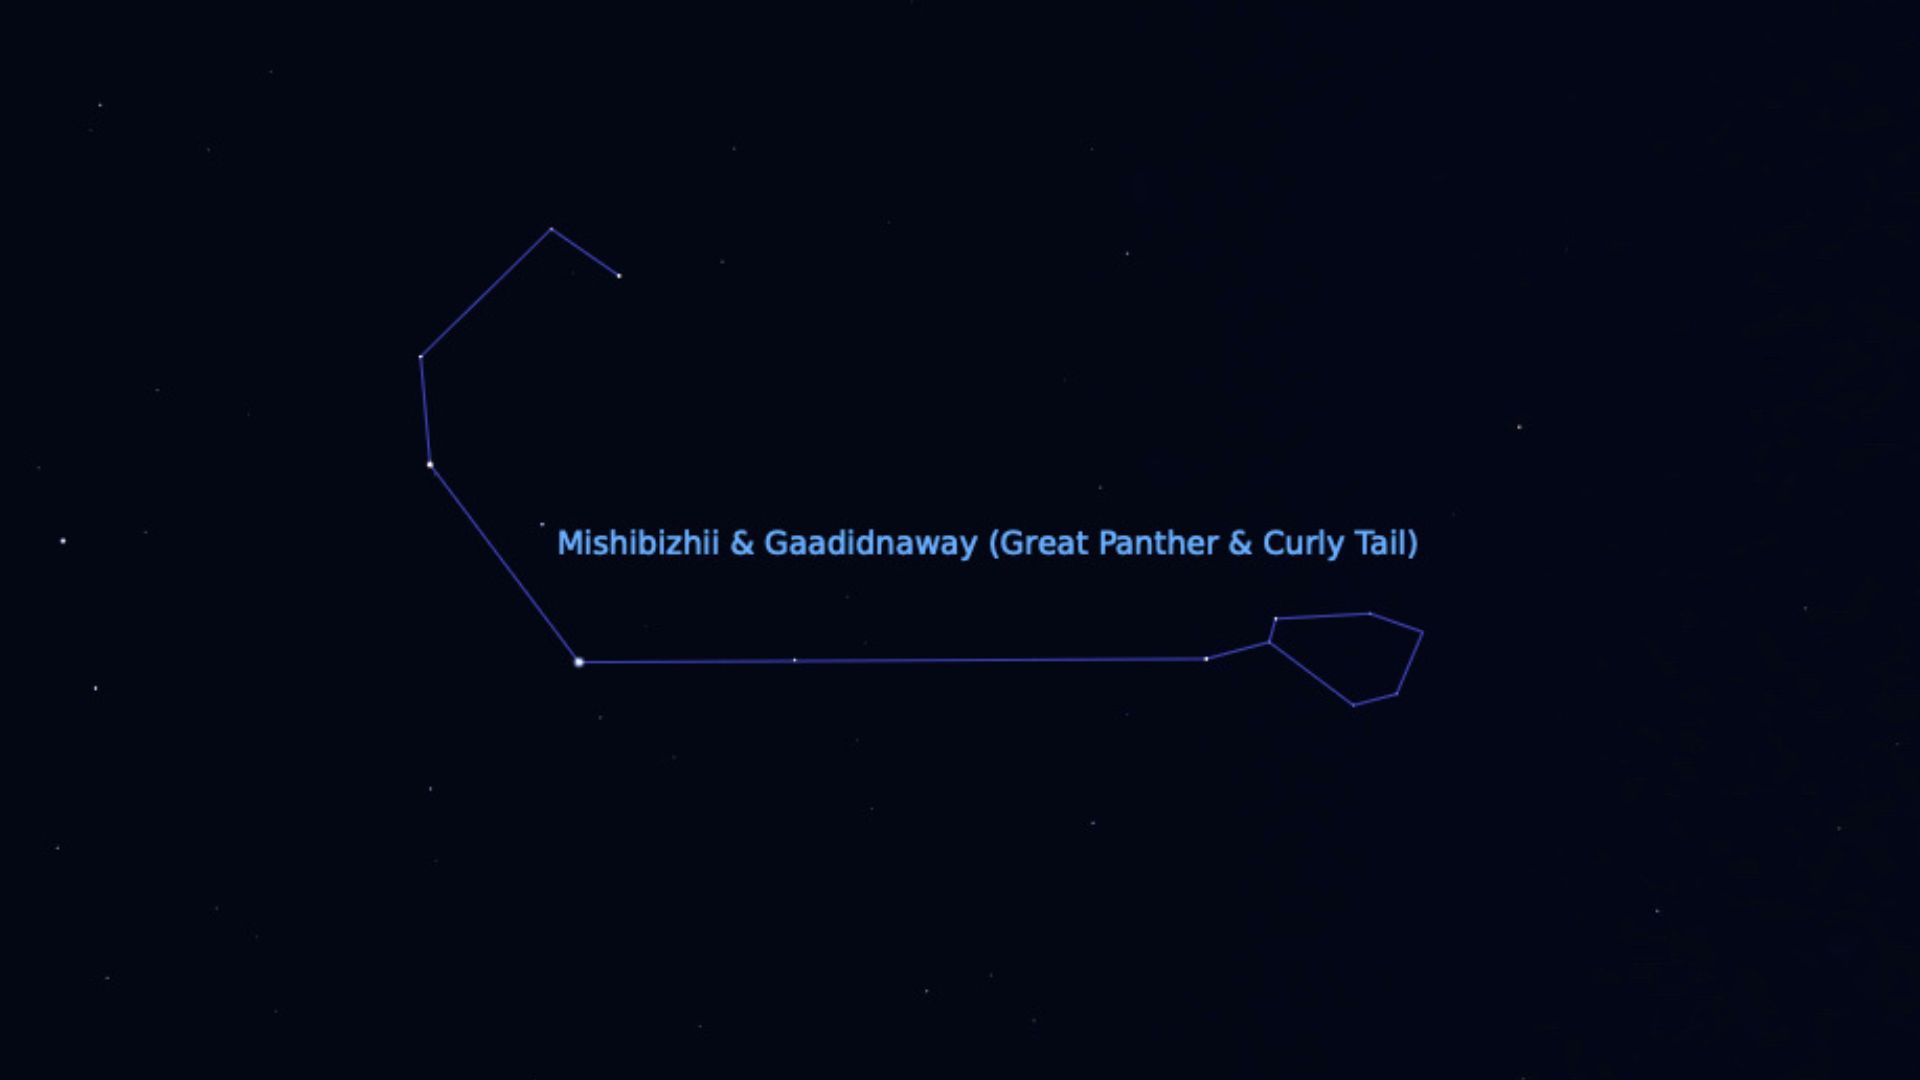 graphic illustration from Stellarium showing the Curly Tail in the night sky.